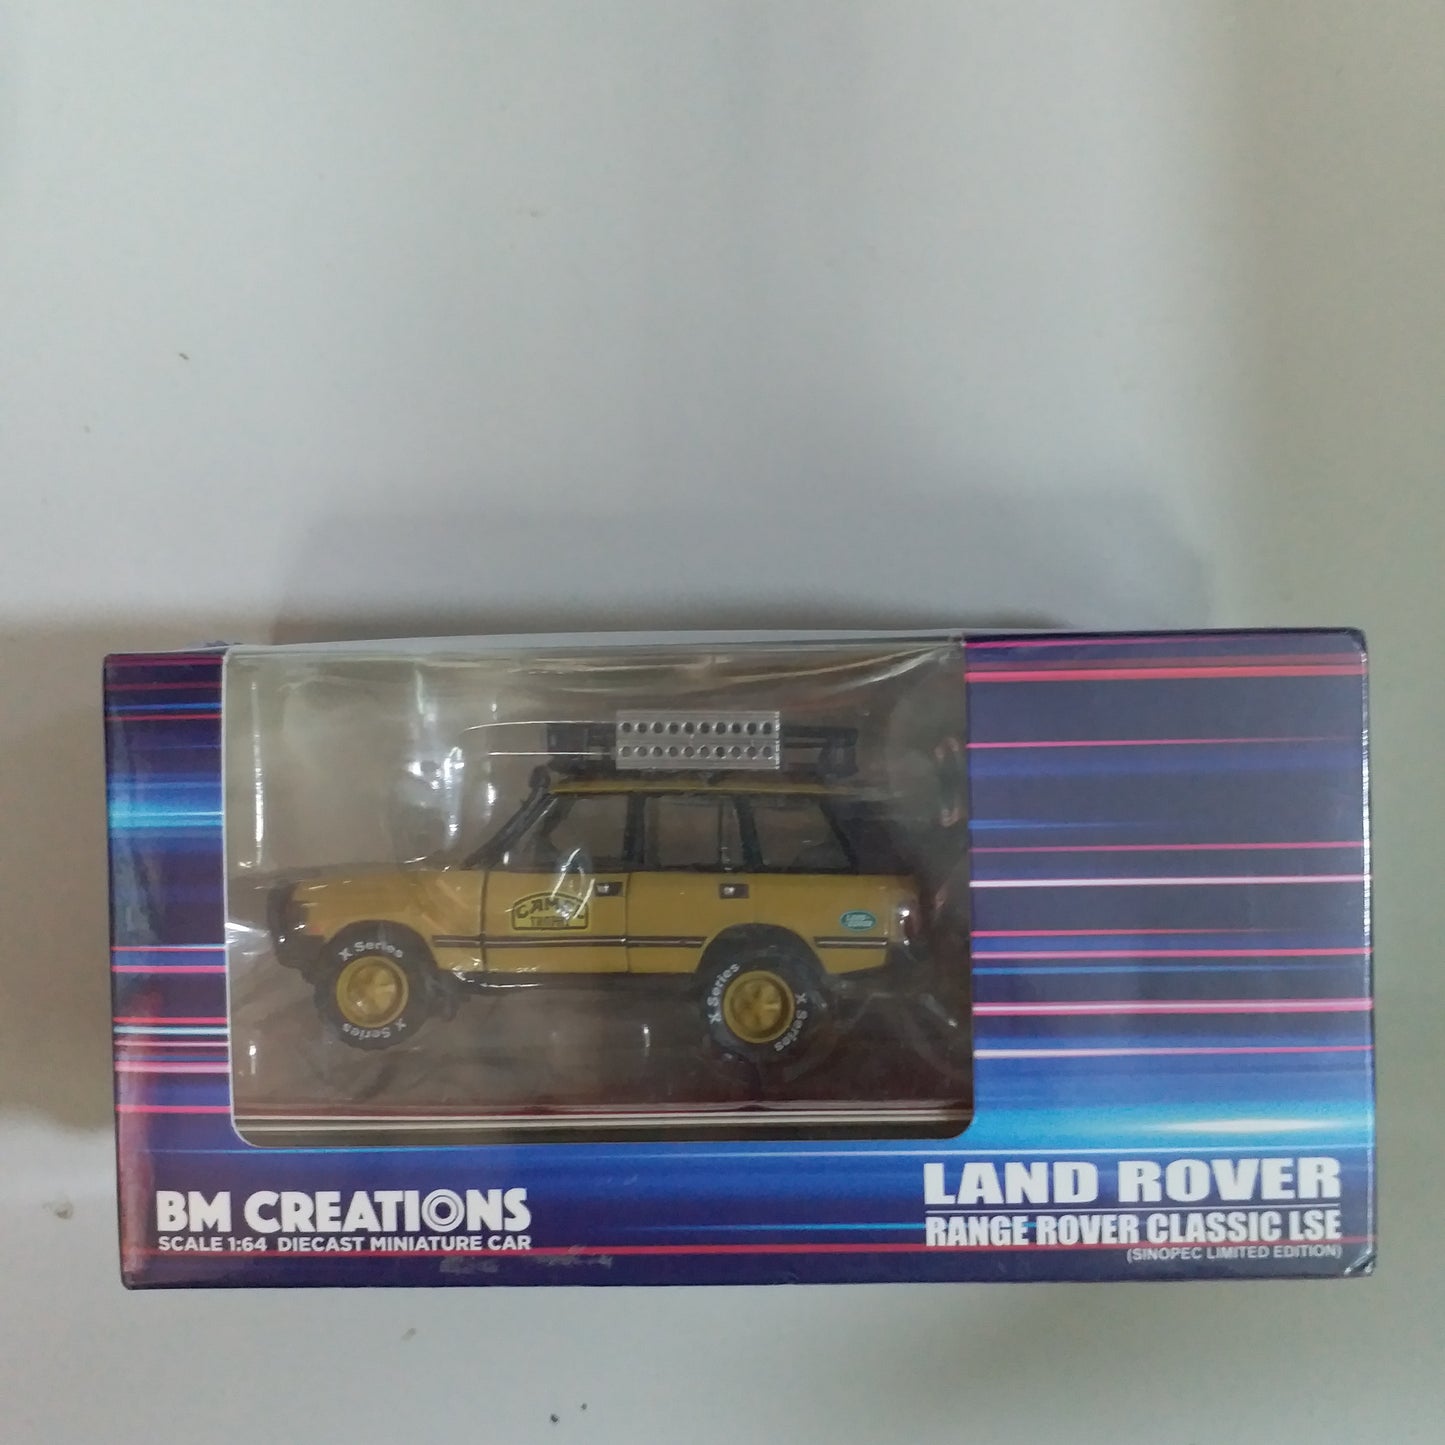 BM Creation 1:64 SCALE Land Rover Range Rover Classic LSE (Sinopec Limited Edition)